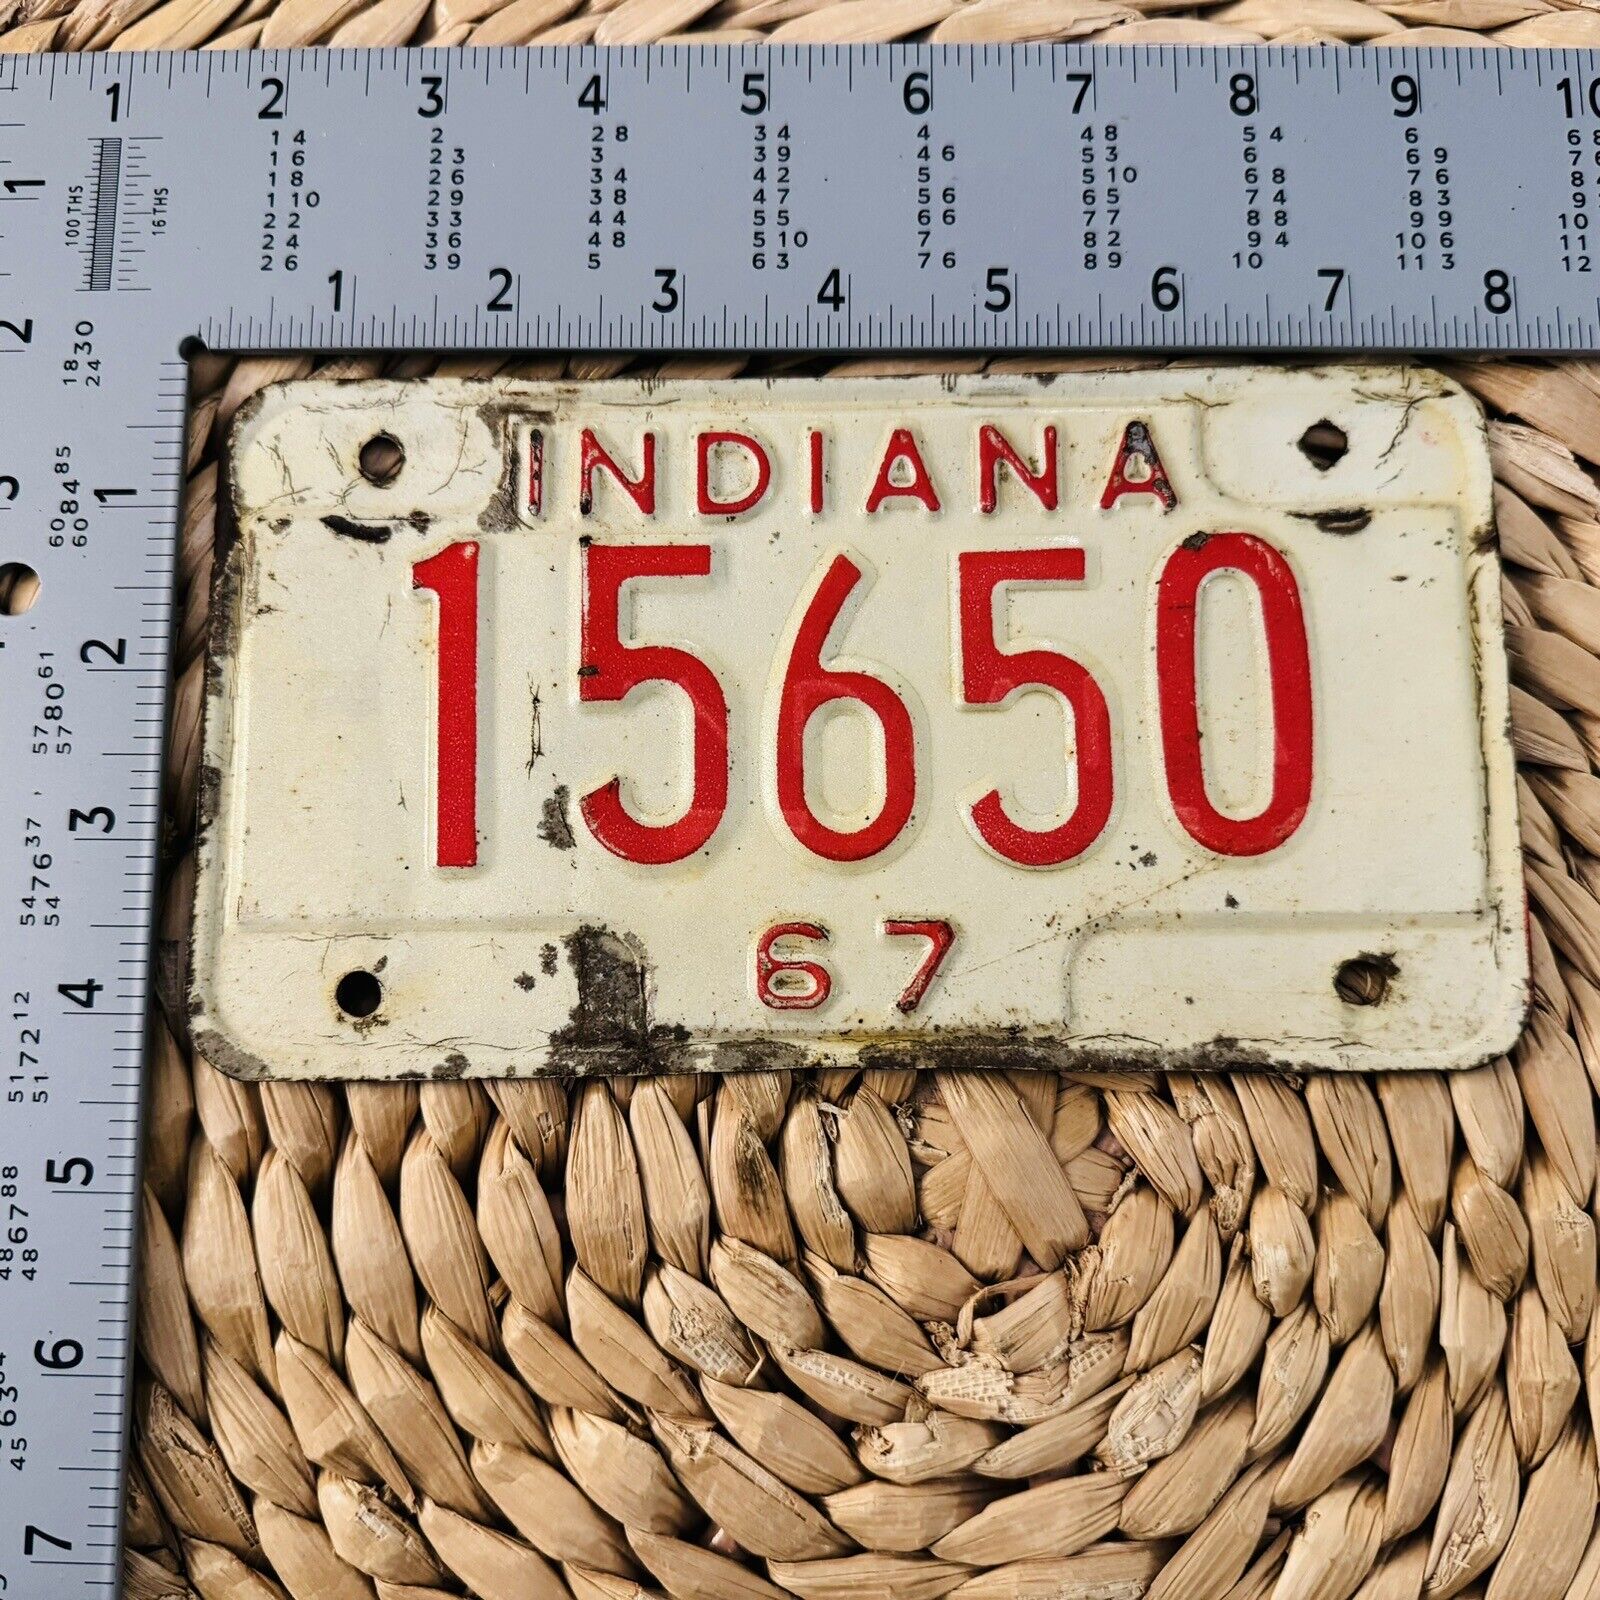 1967 Indiana MOTORCYCLE License Plate ALPCA Harley BMW Indian 15650